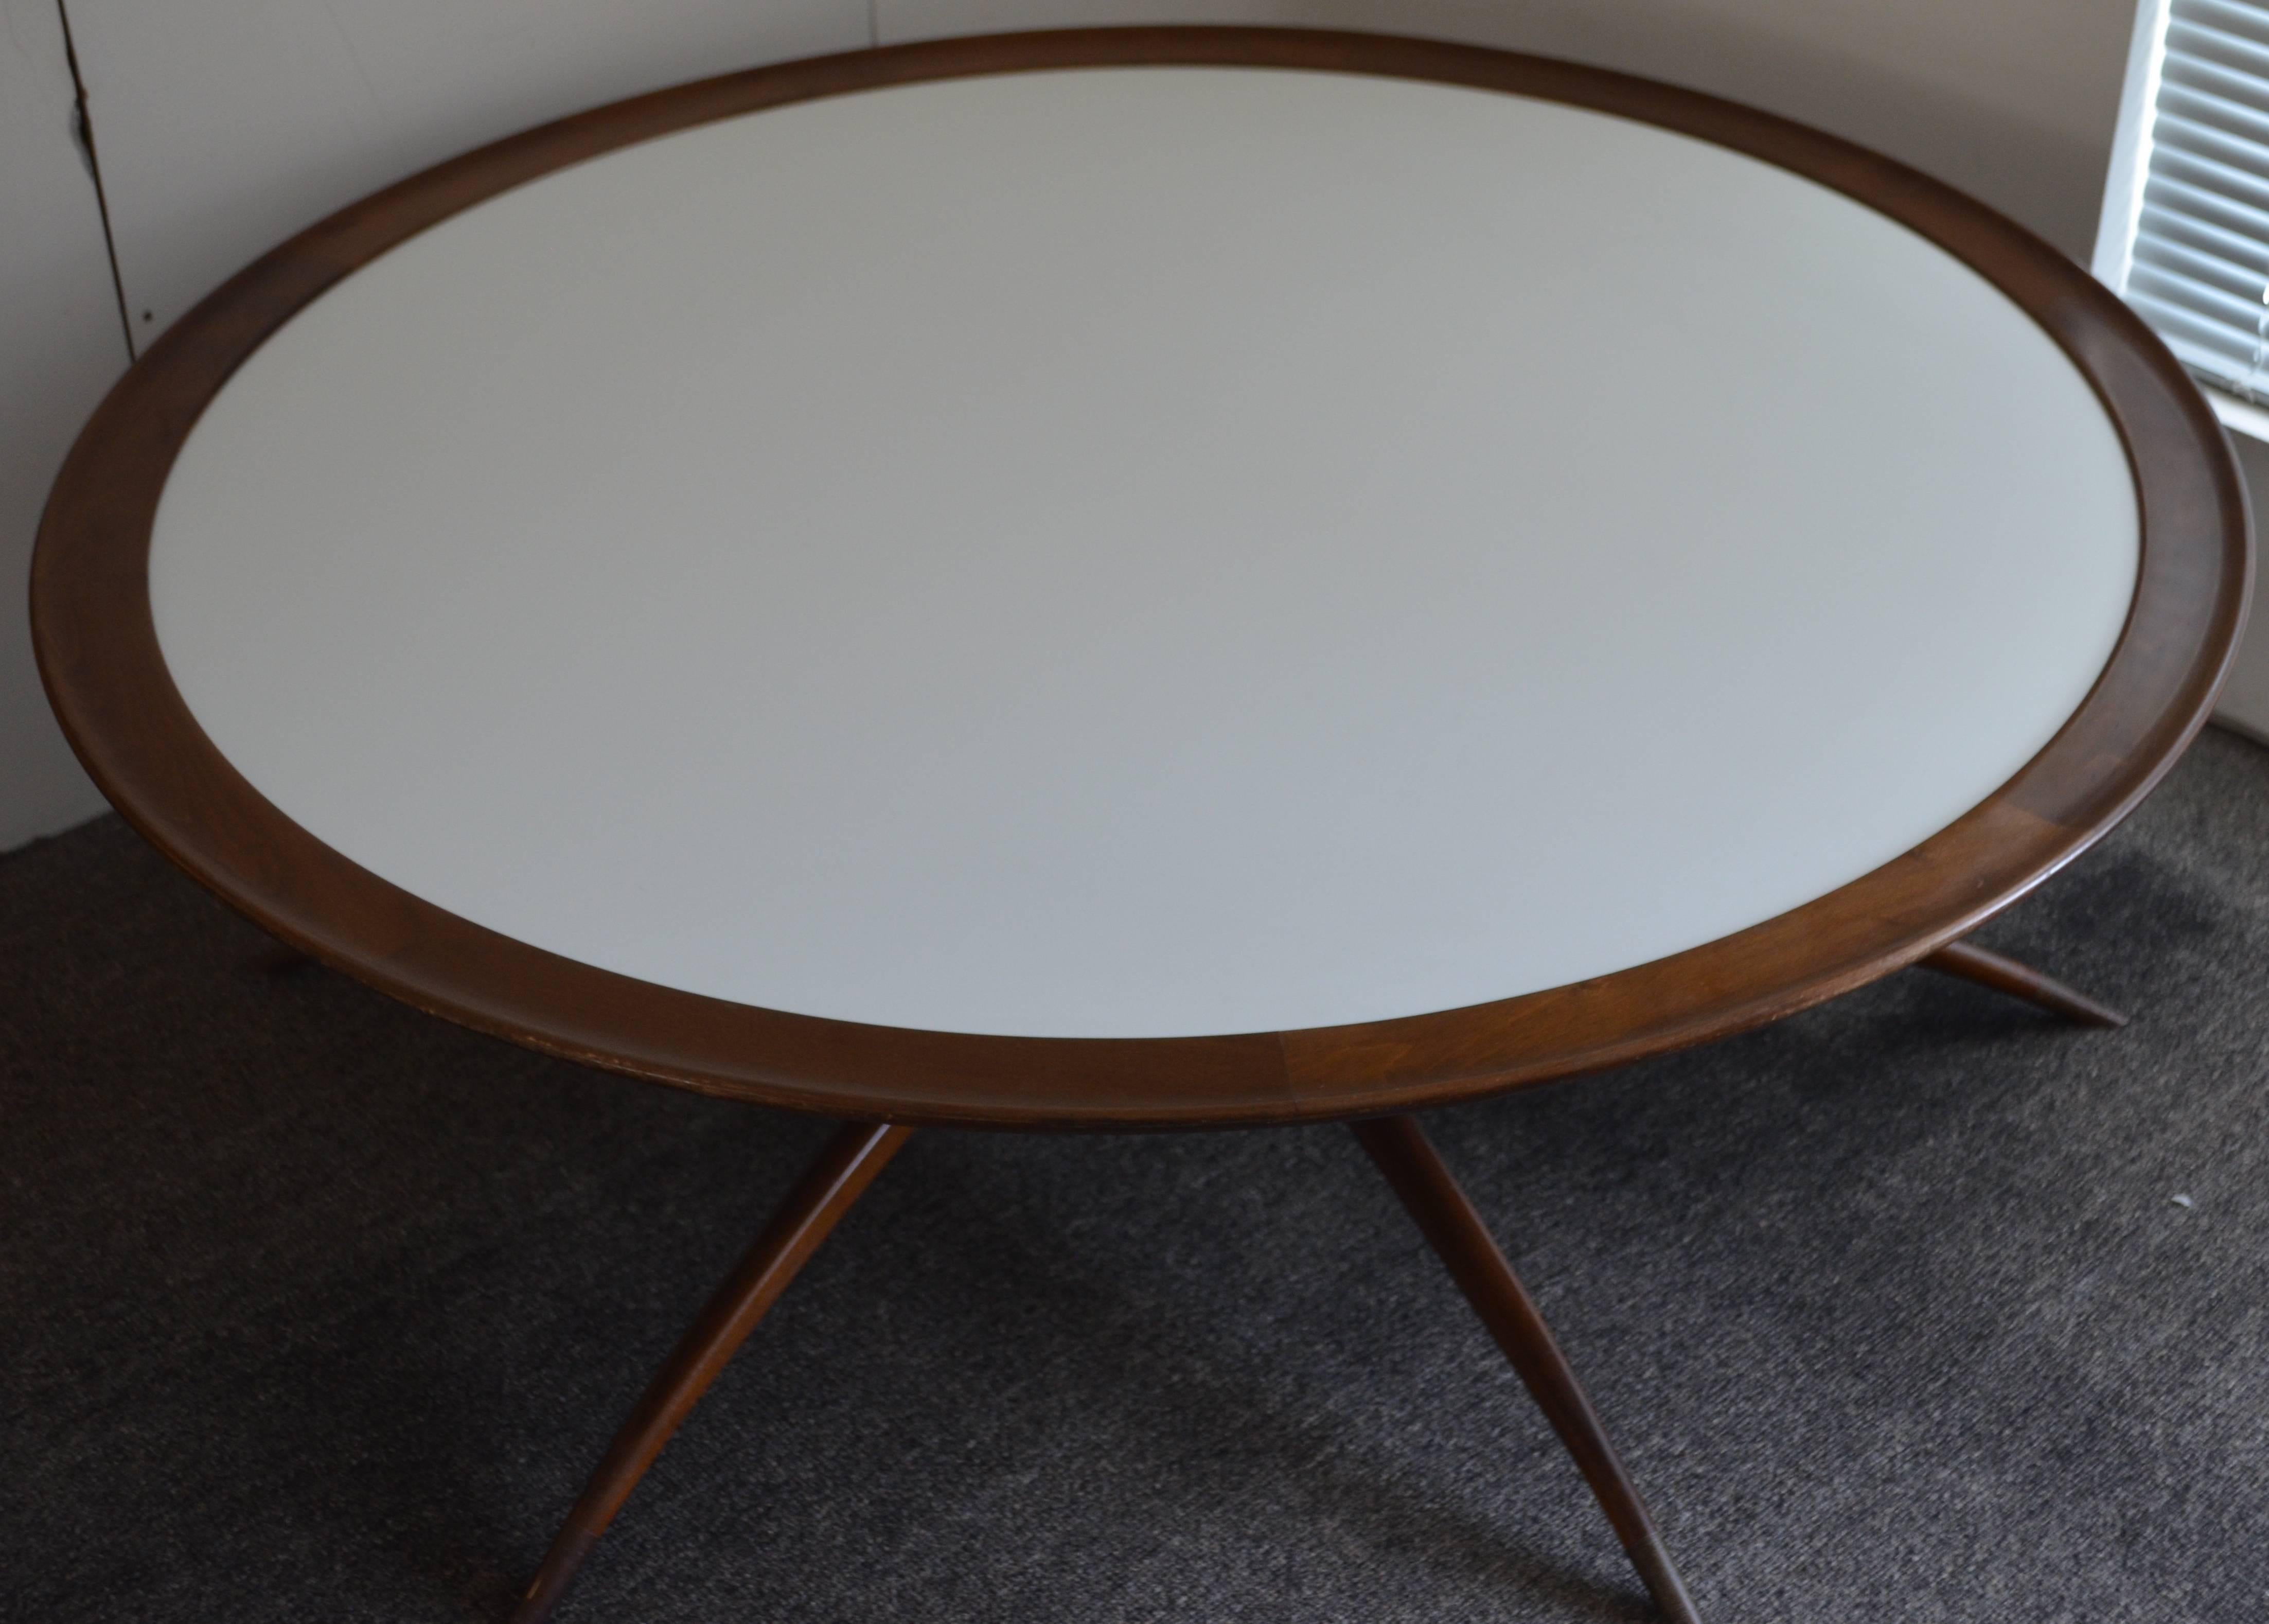 Danish Table with Spider Leg Base and Milk Glass Top Attributed to Carlo di Carli